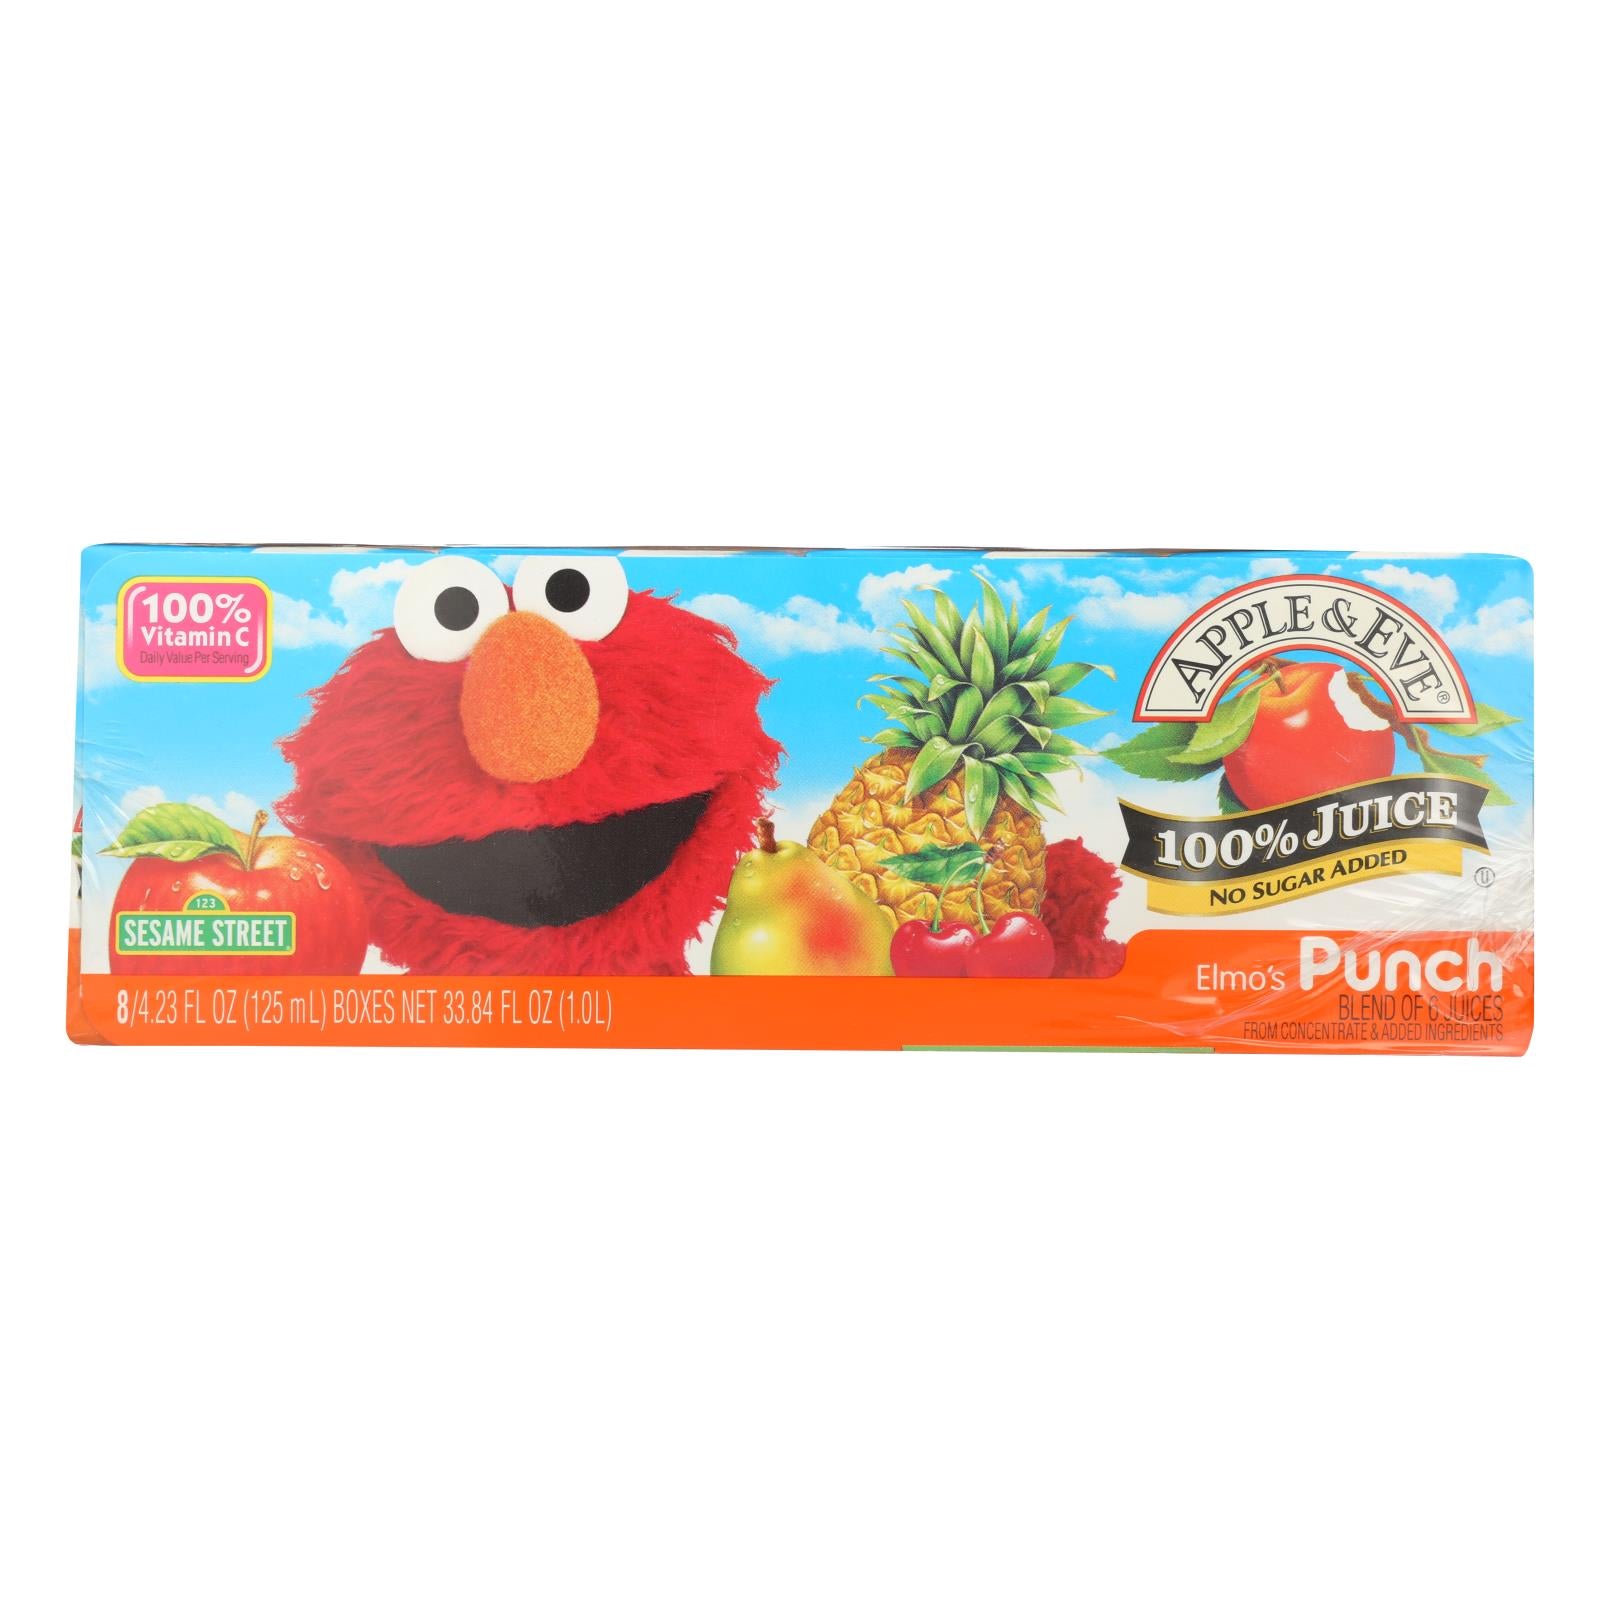 Apple & Eve, Apple and Eve Sesame Street Juice Elmo's Punch - Case of 6 - 6 Bags (Pack of 5)